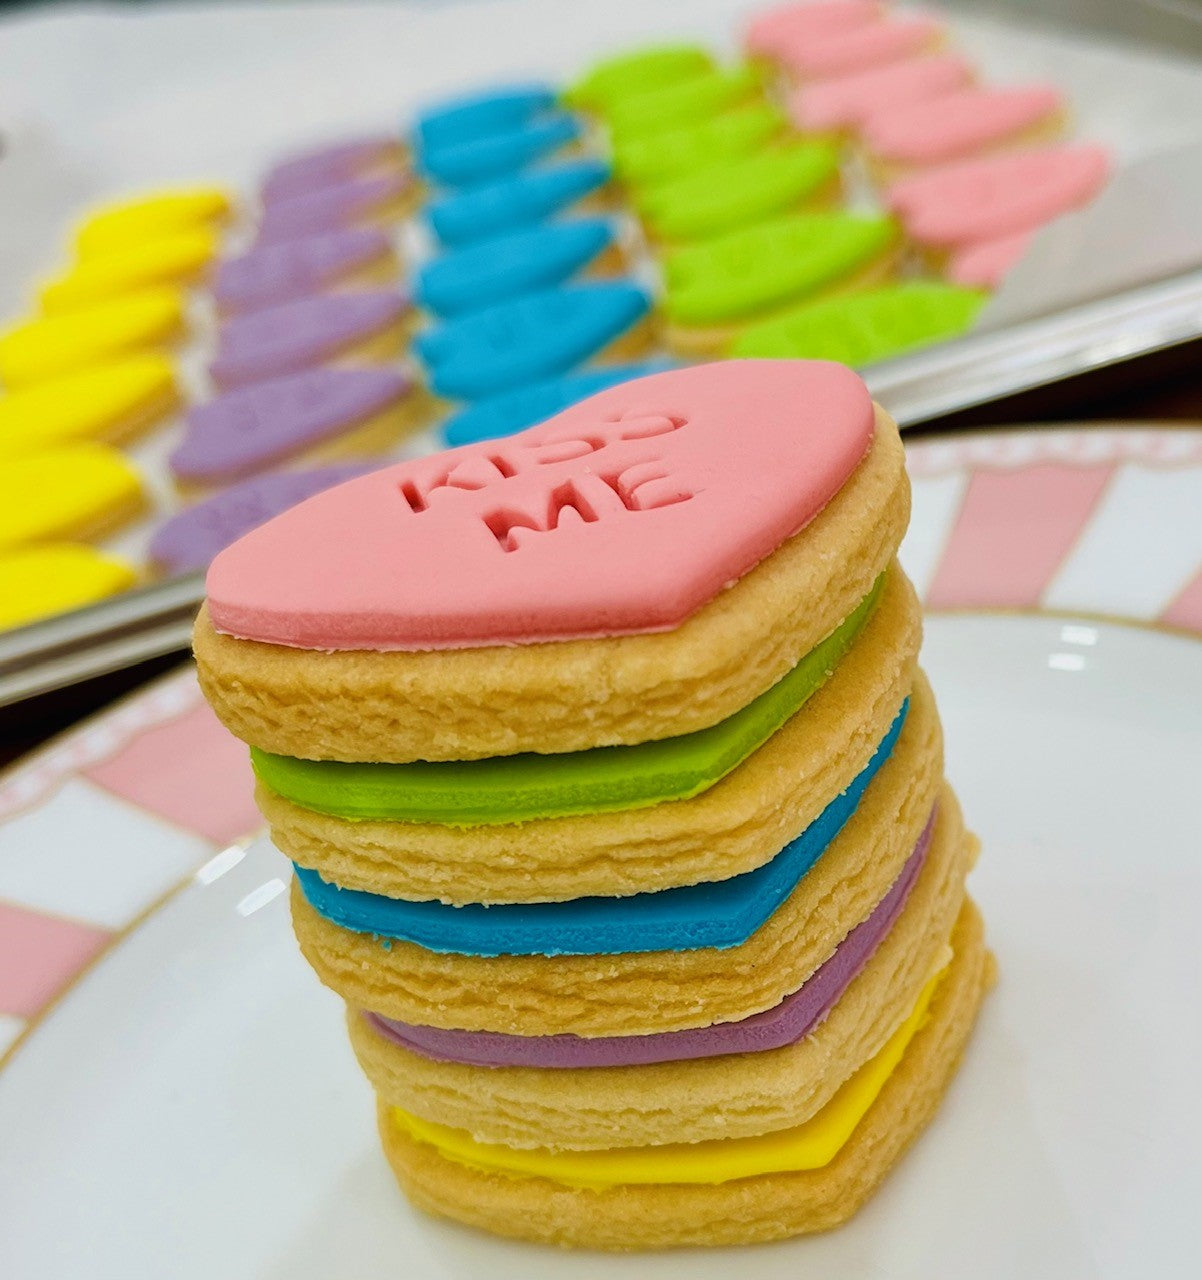 With Love - Conversation Heart Cookies